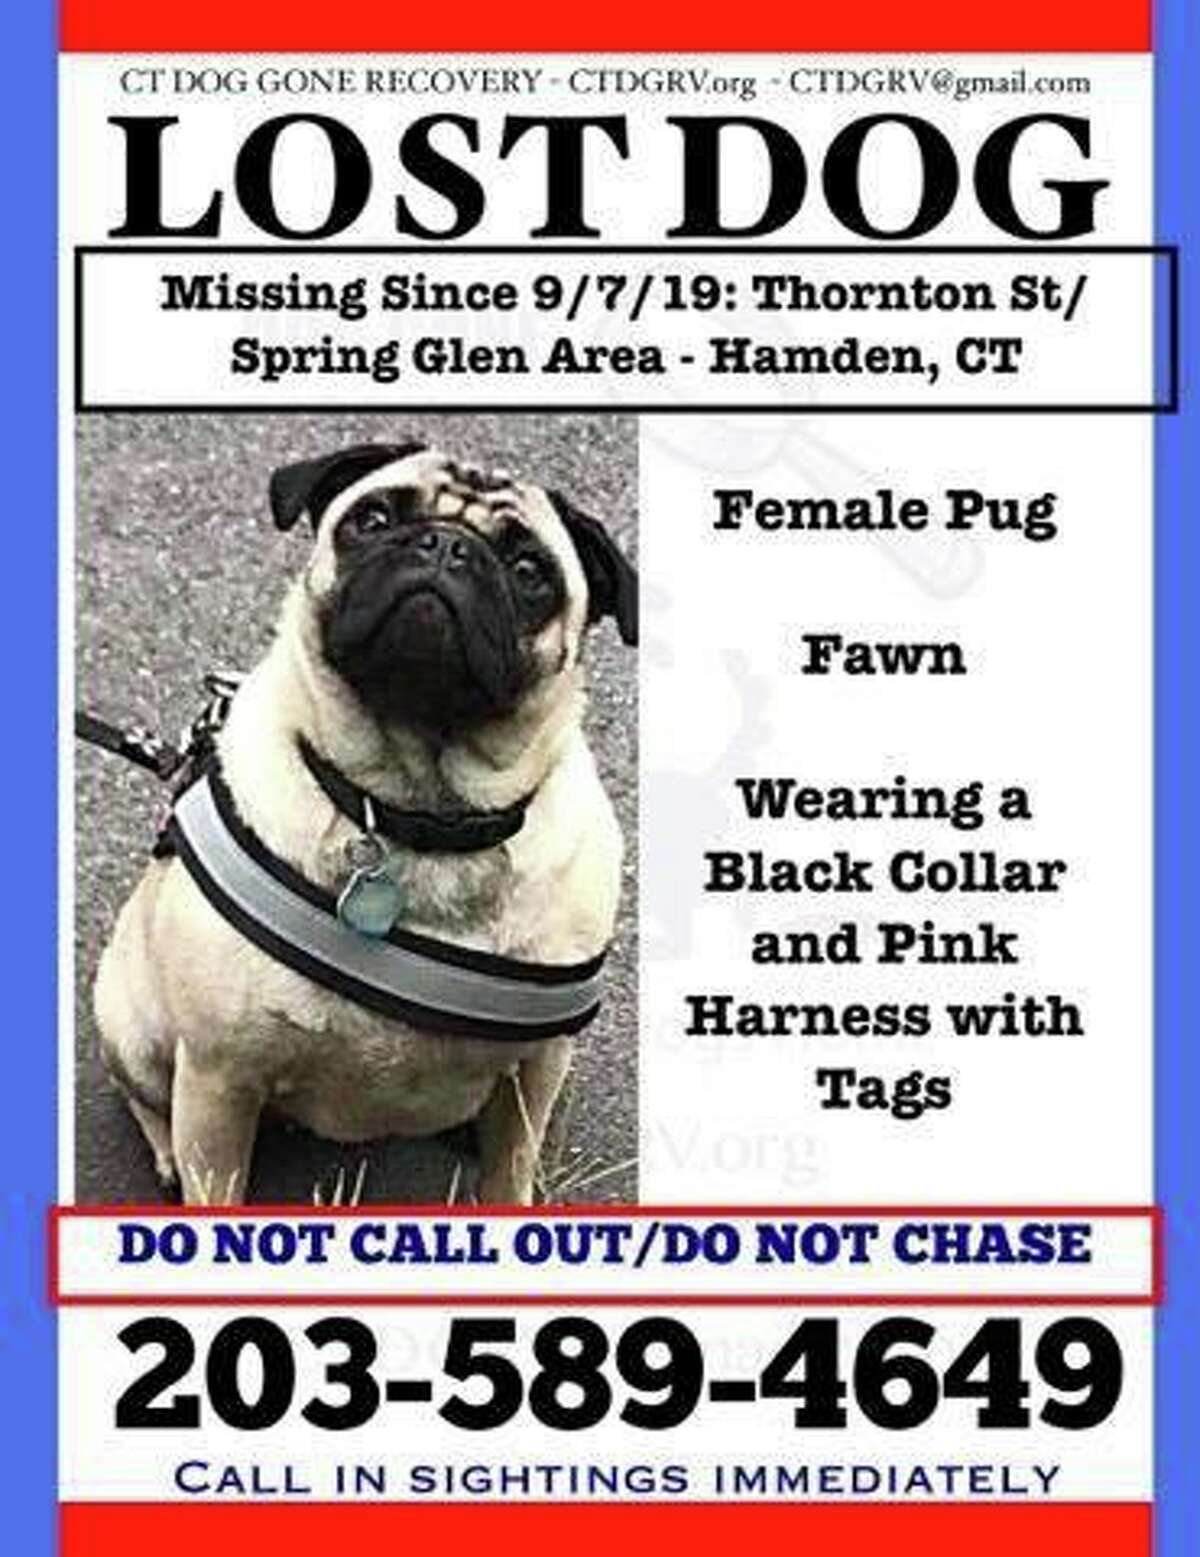 Authorities, including the North Haven police department, are looking for a pug that went missing Sept. 7, 2019 in the Thornton Street/Spring Glen area of Hamden.